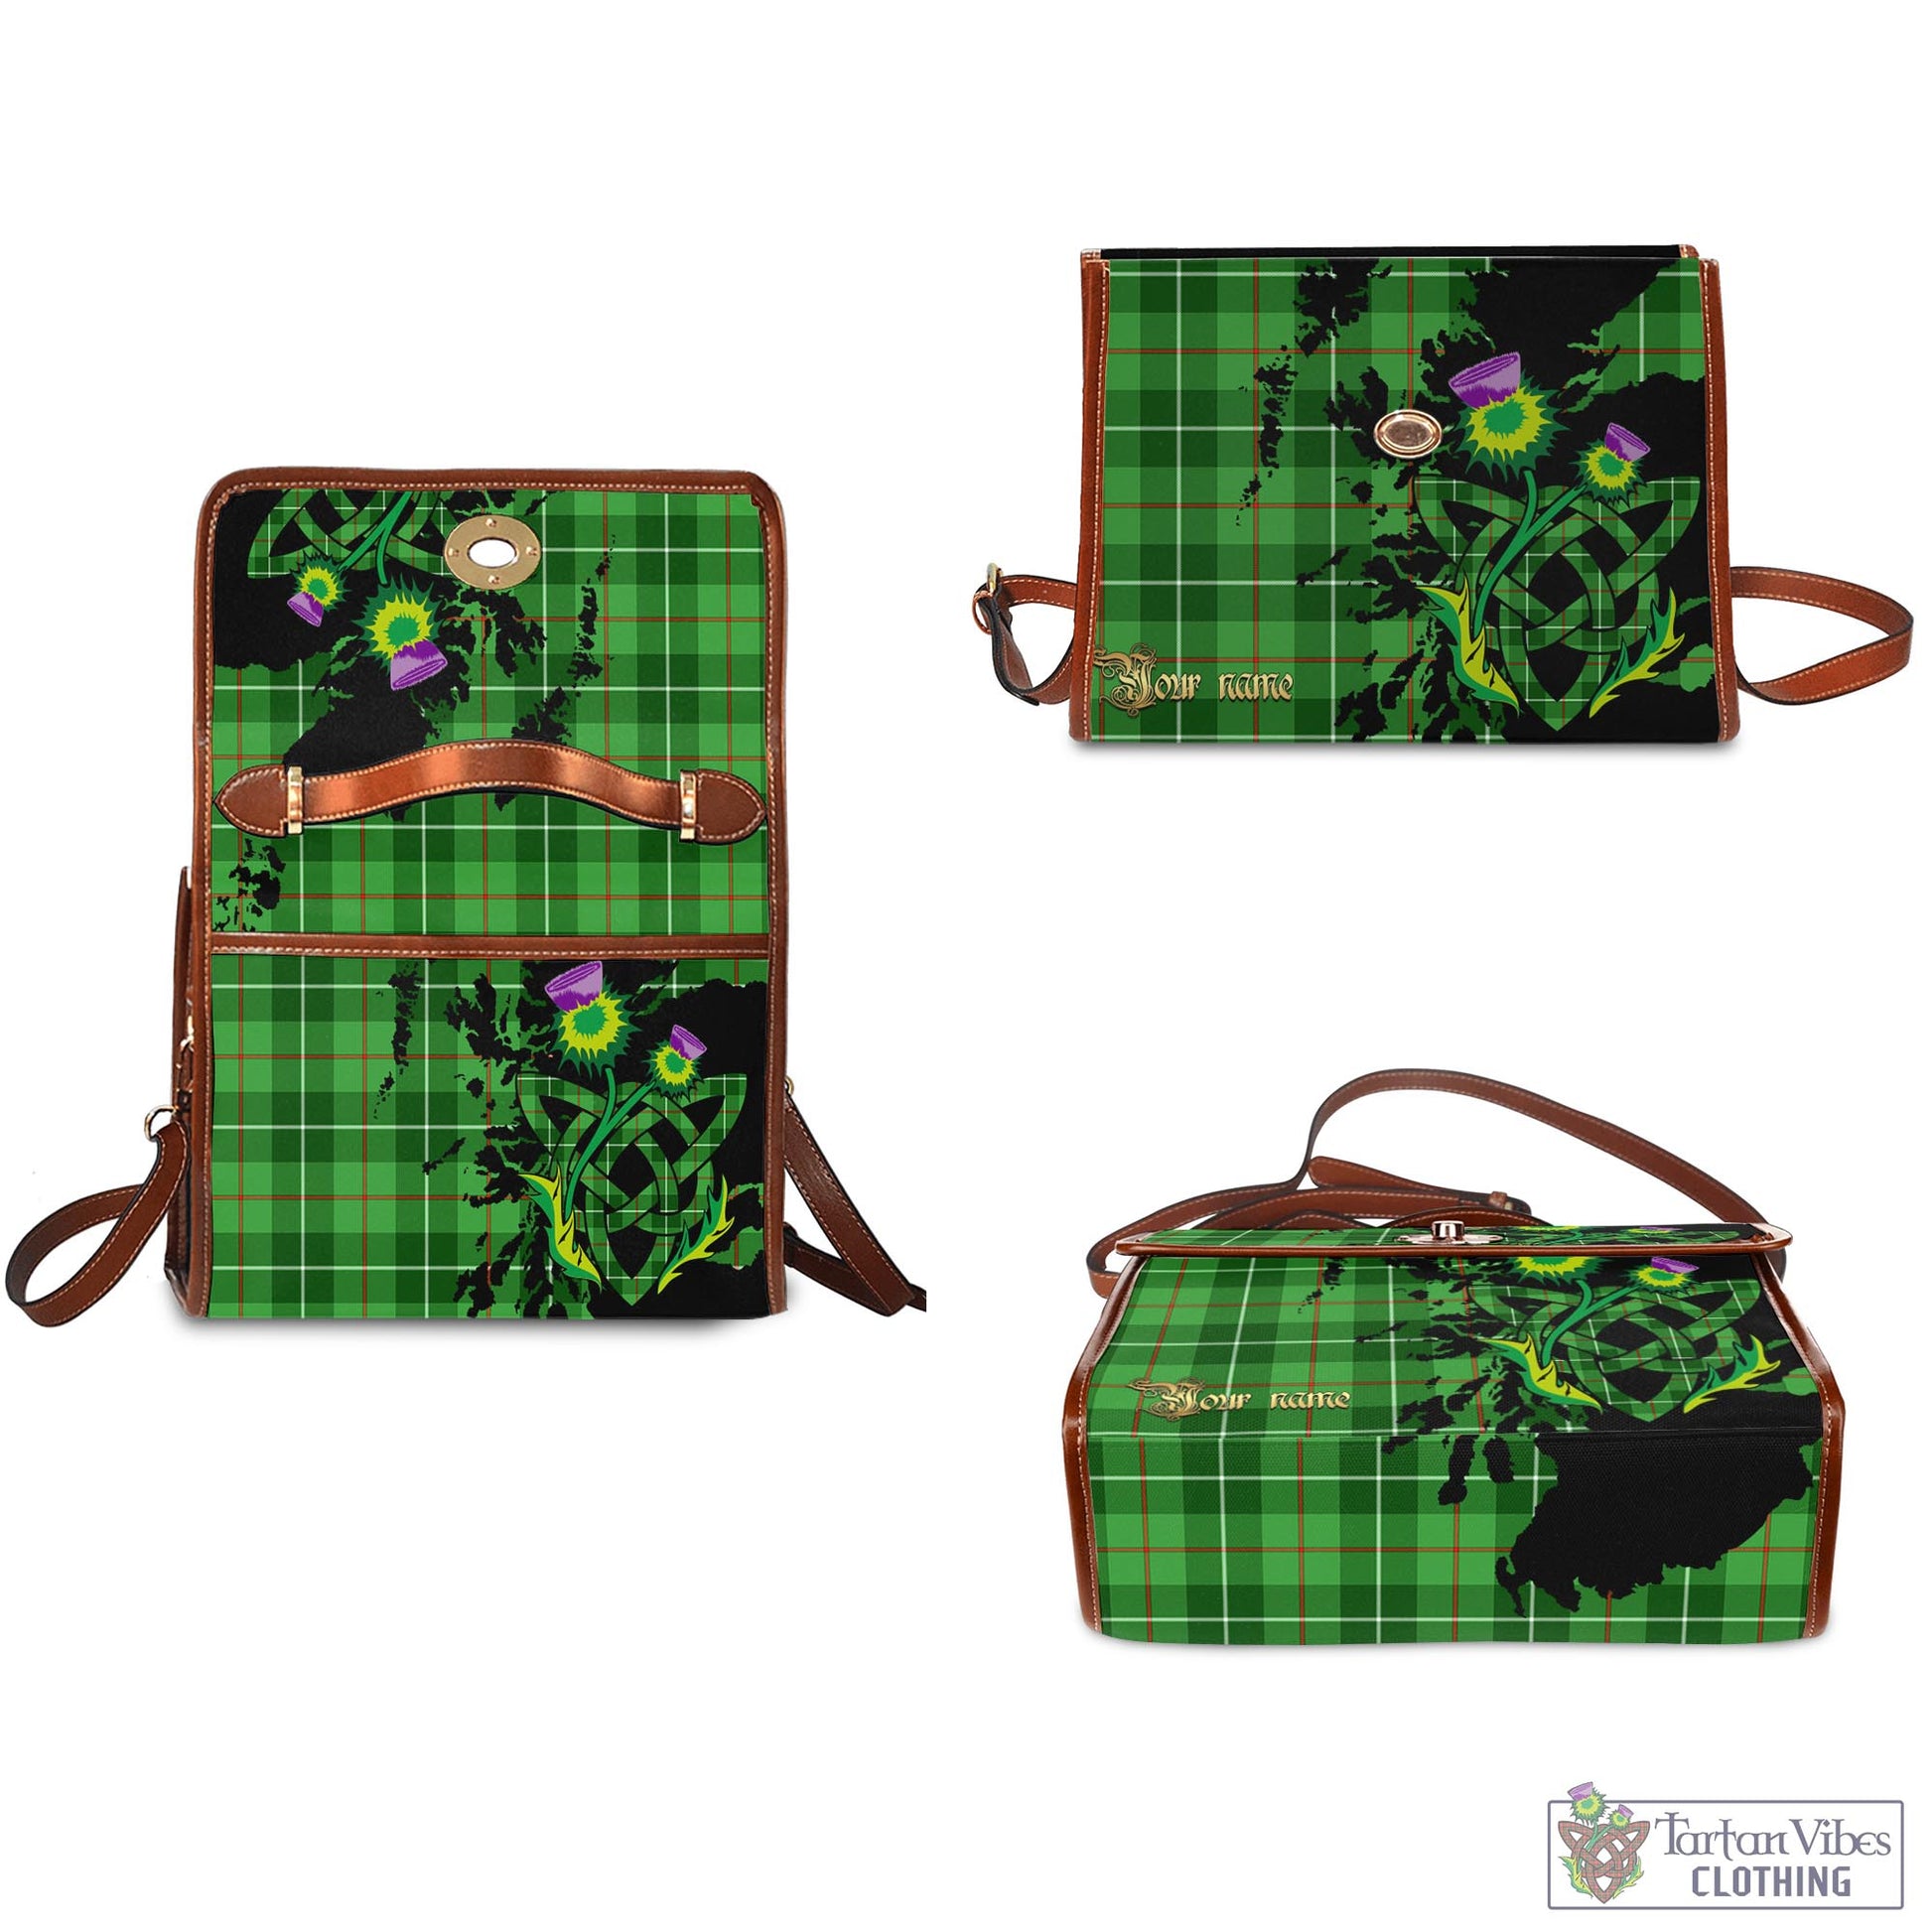 Tartan Vibes Clothing Clephan Tartan Waterproof Canvas Bag with Scotland Map and Thistle Celtic Accents